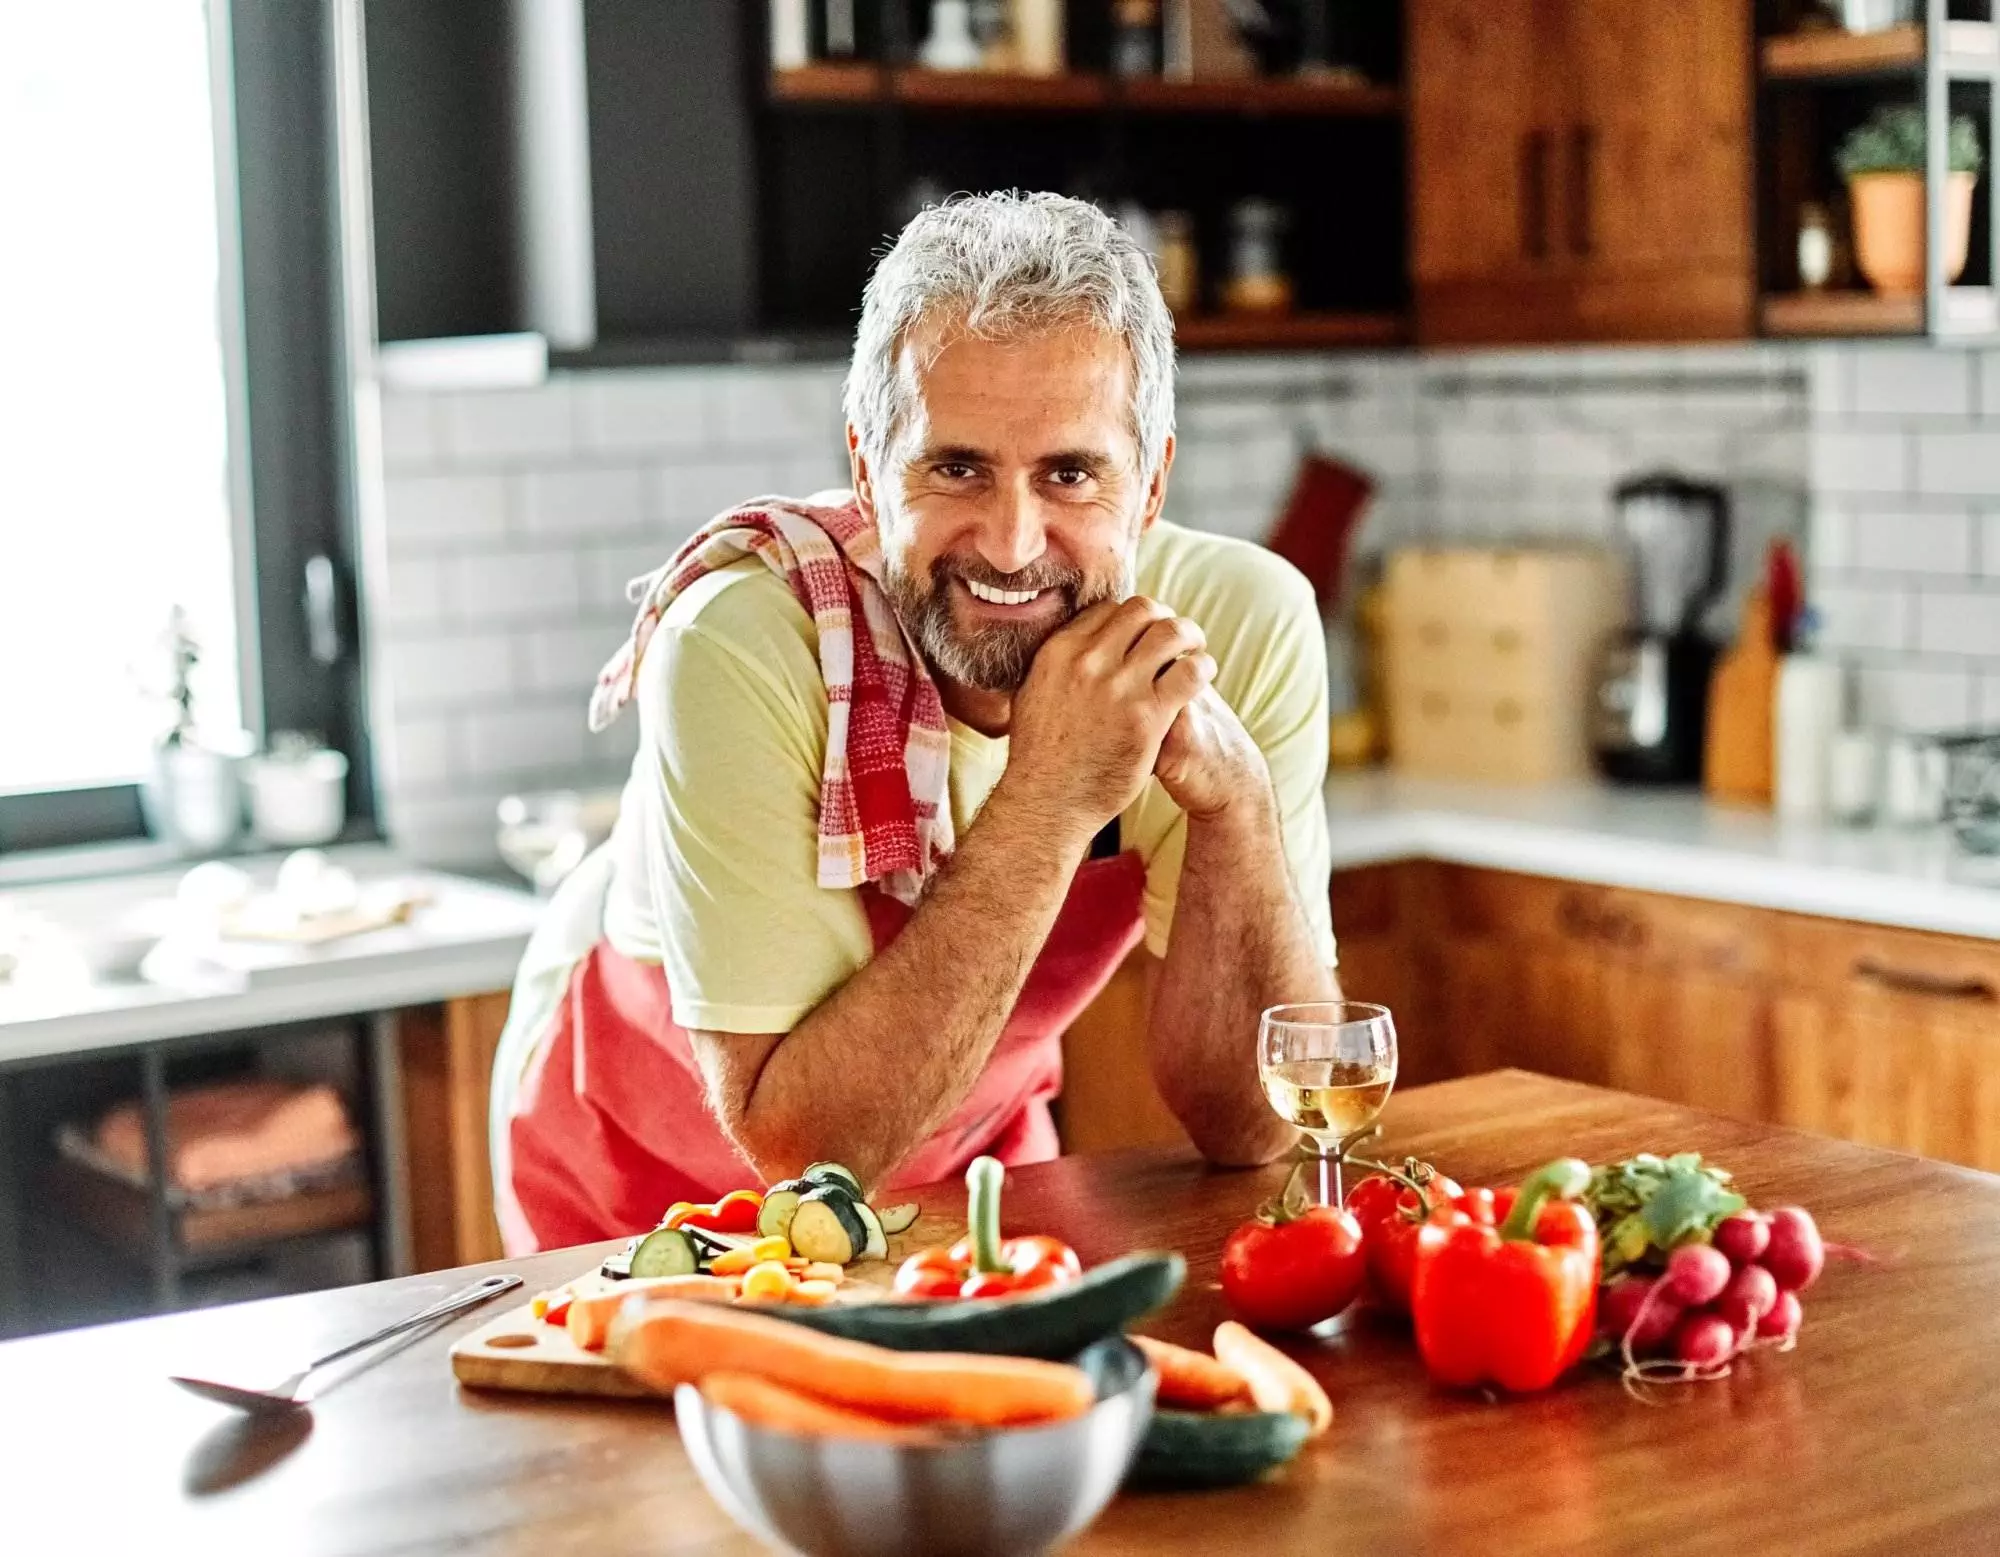 Man smiling in kitchen with fresh vegetables